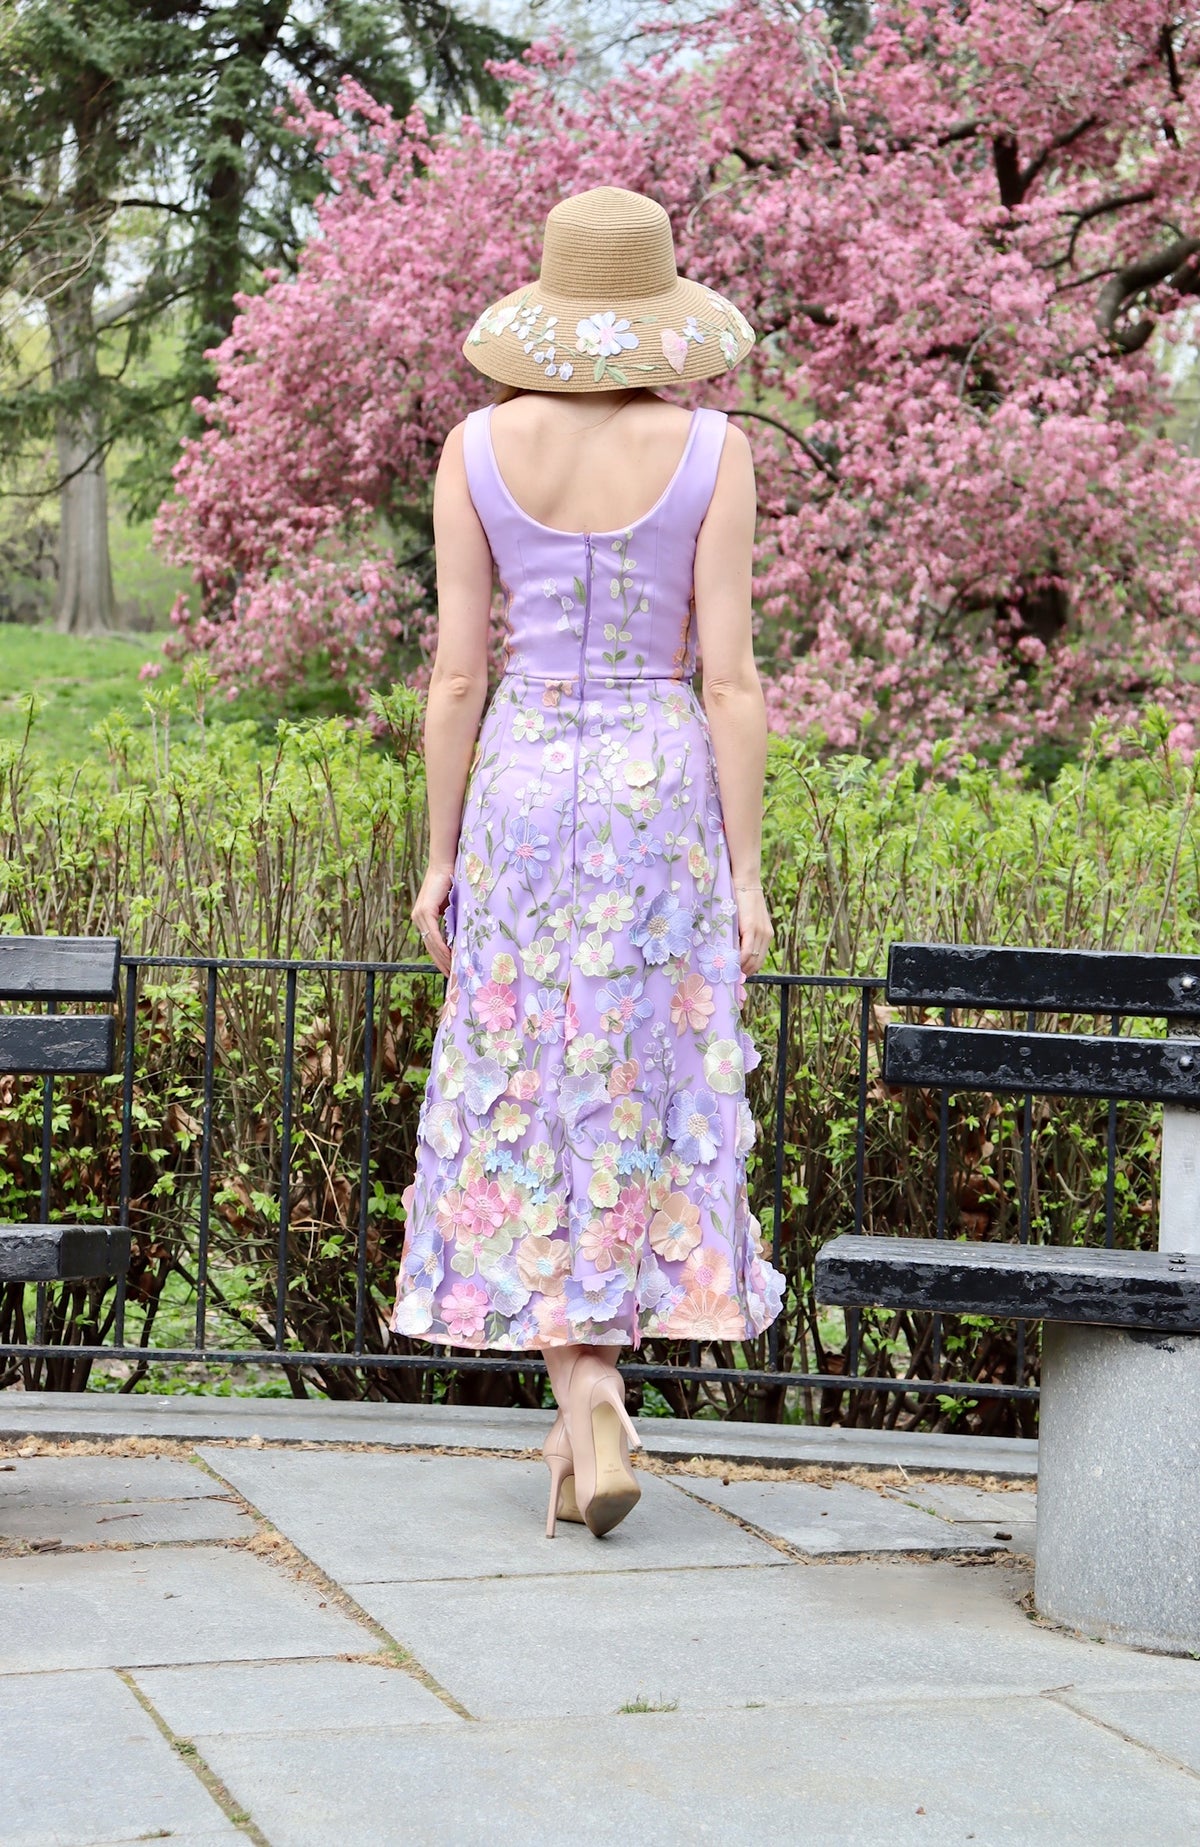 Back view of Model  to show off back of lilac midi length satin floral appliquéd dress with blush, lilac, and yellow florals with straw sun hat with floral applique details